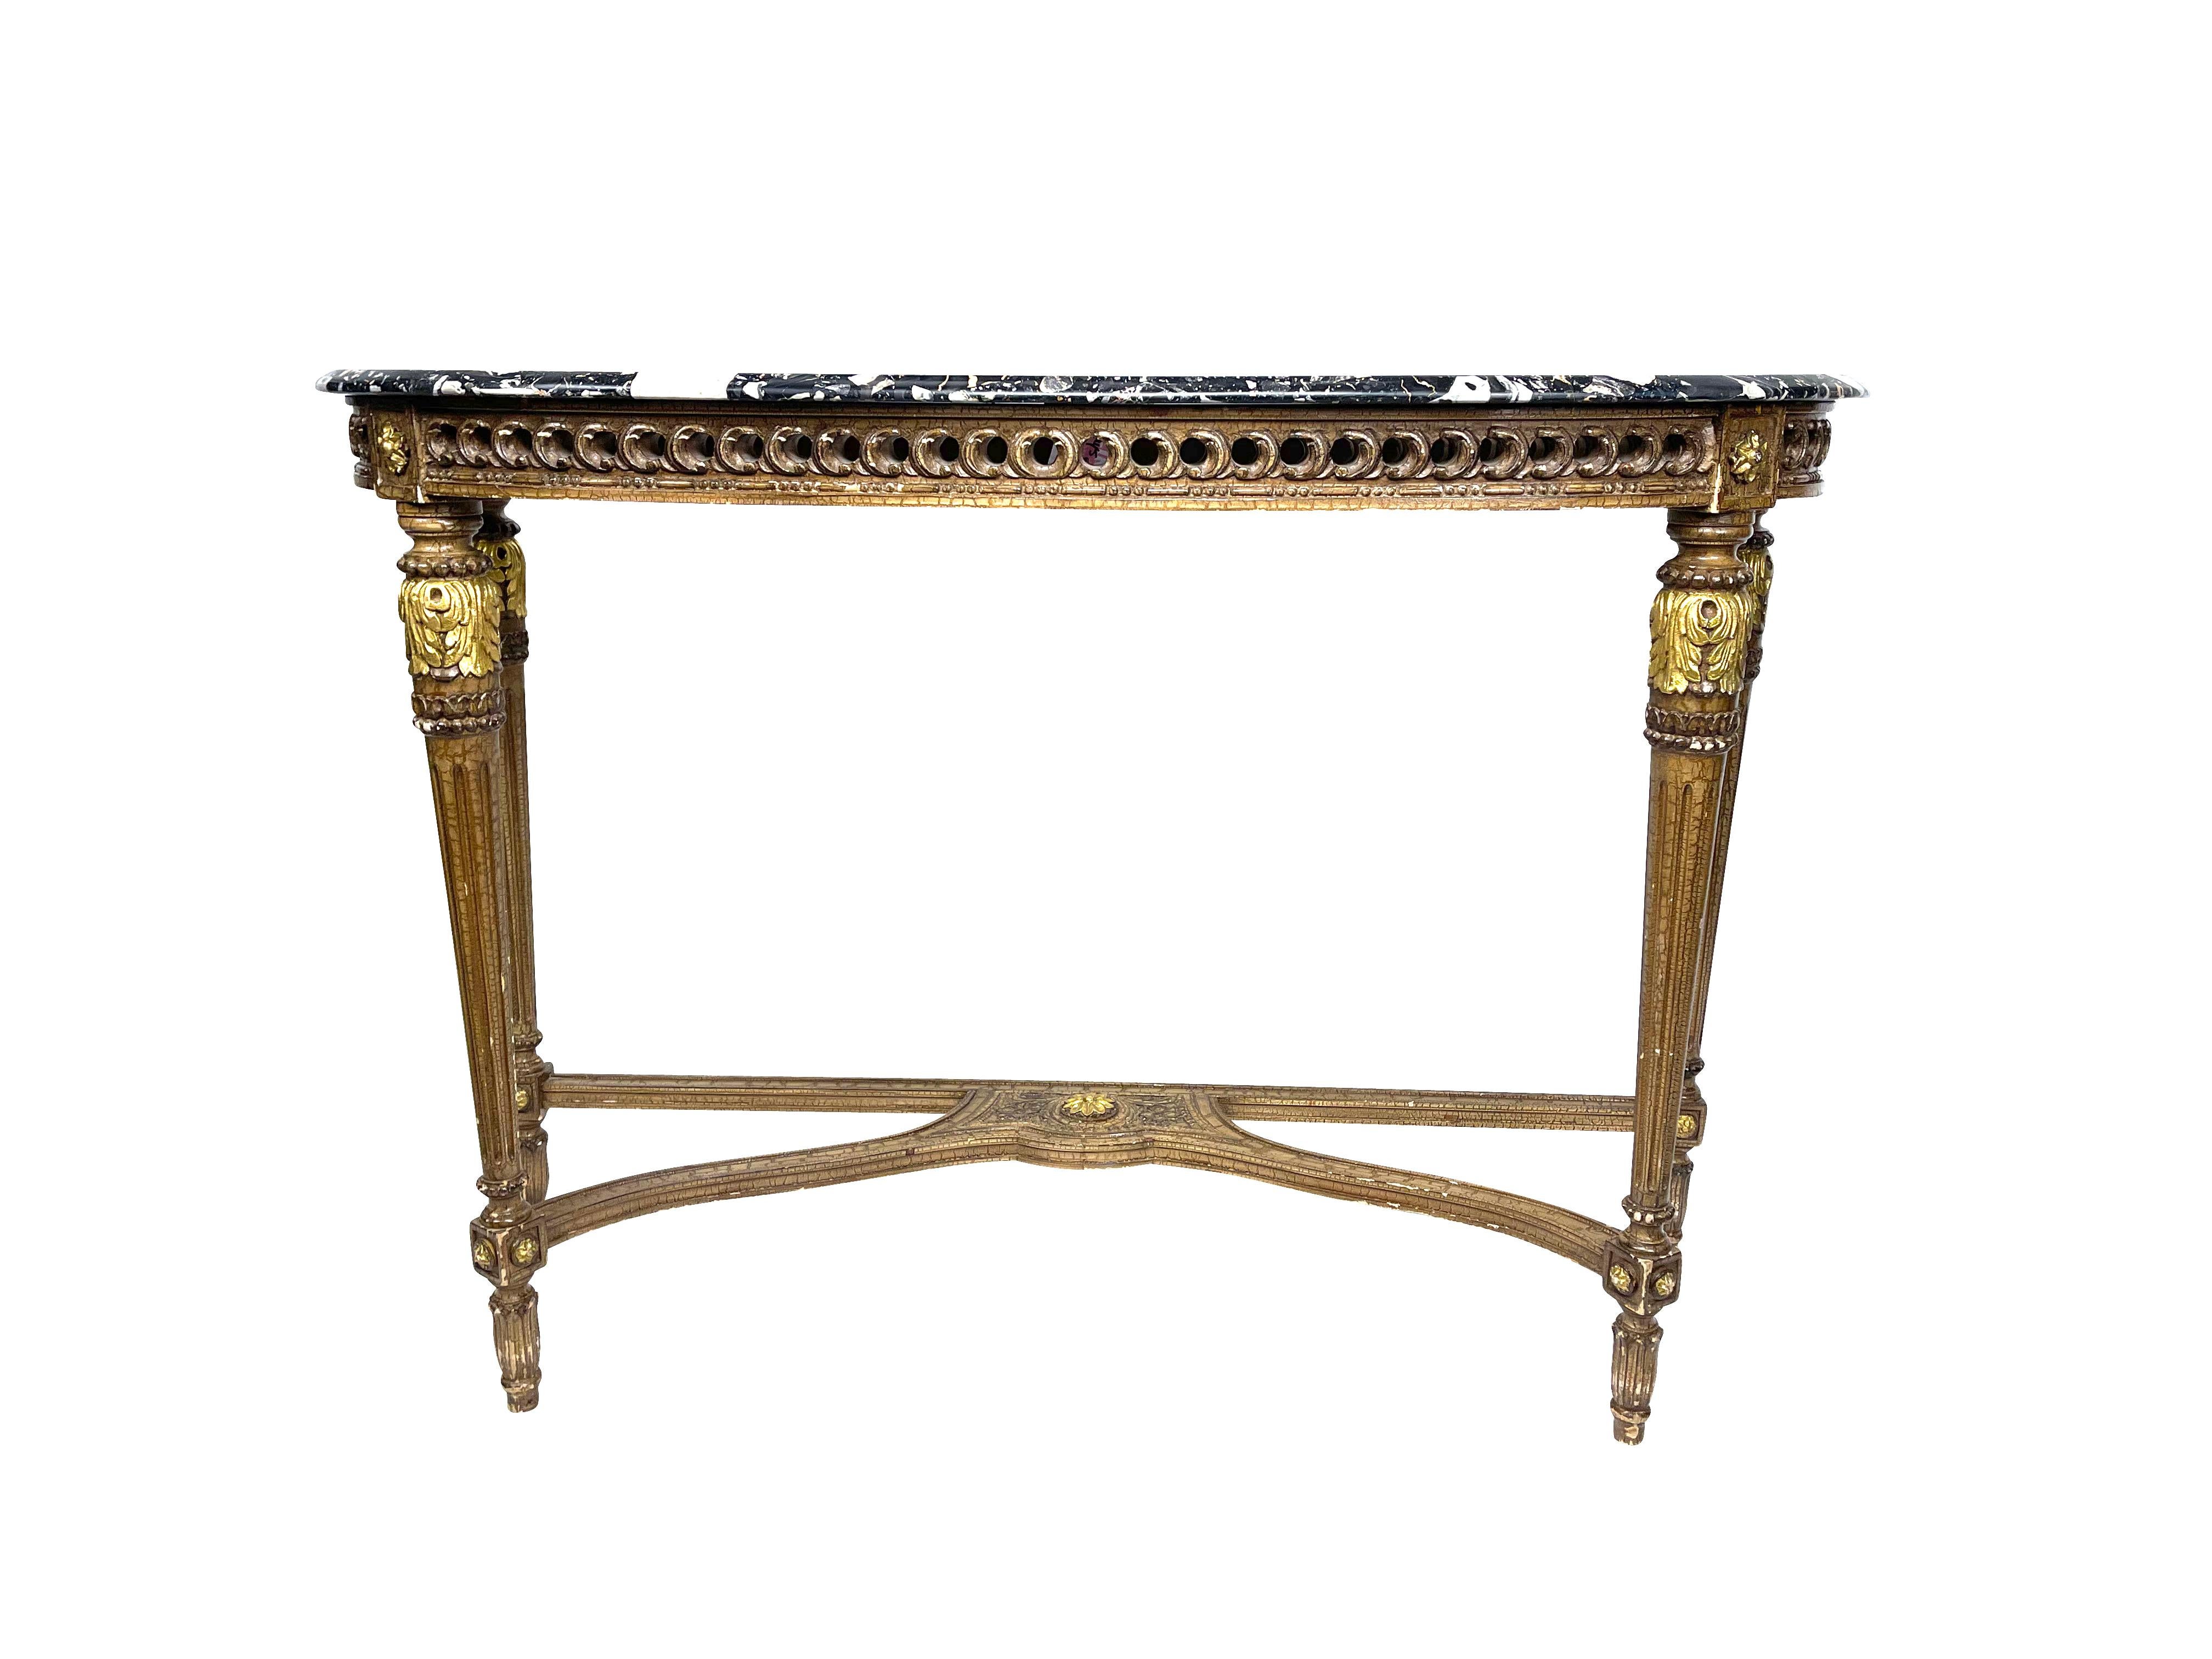 Louis XVI style gold gilt console table with black marble top. Beautifully carved with rosette, and foliate decoration on the base, reeded legs and intricately carved with a pierced gallery below the marble top, The black marble is speckled with